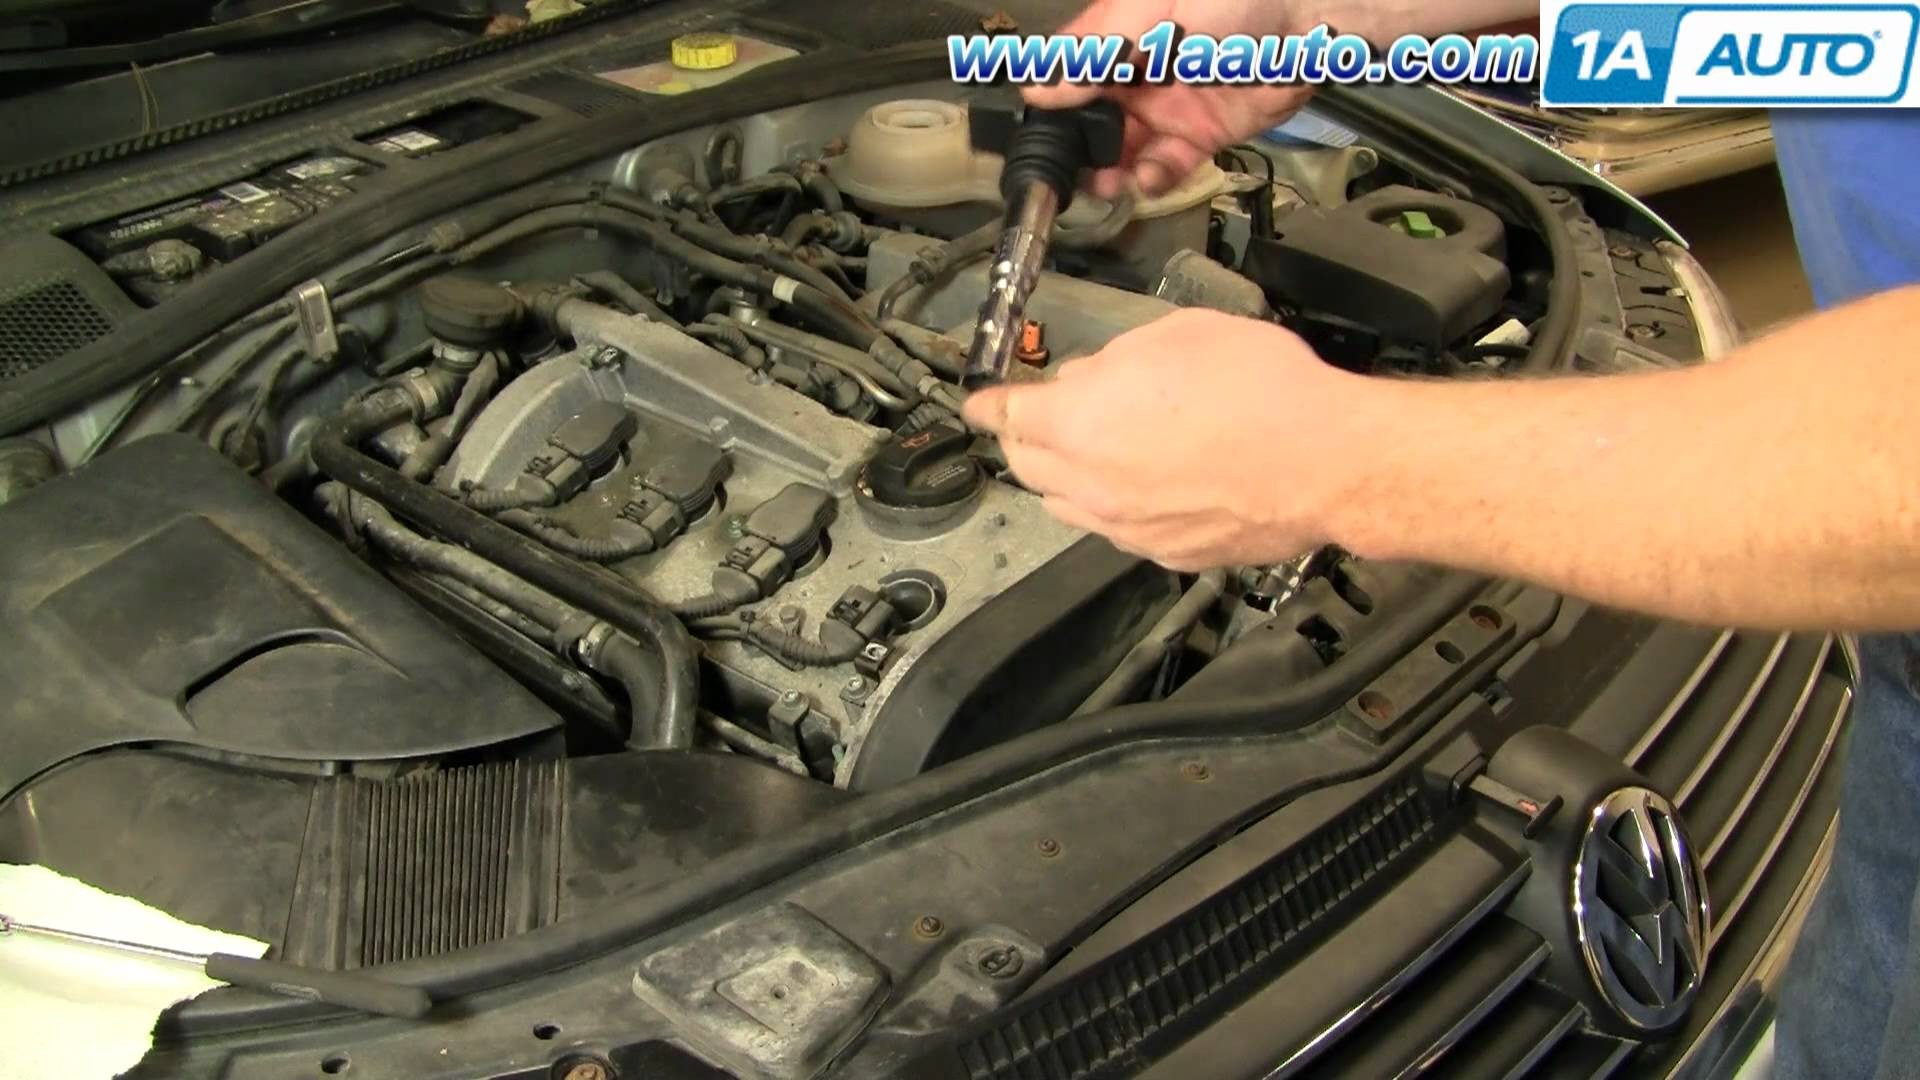 1999 Vw Passat Engine Diagram How to Install Replace Engine Ignition Coil Volkswagen Passat 1 8t Of 1999 Vw Passat Engine Diagram